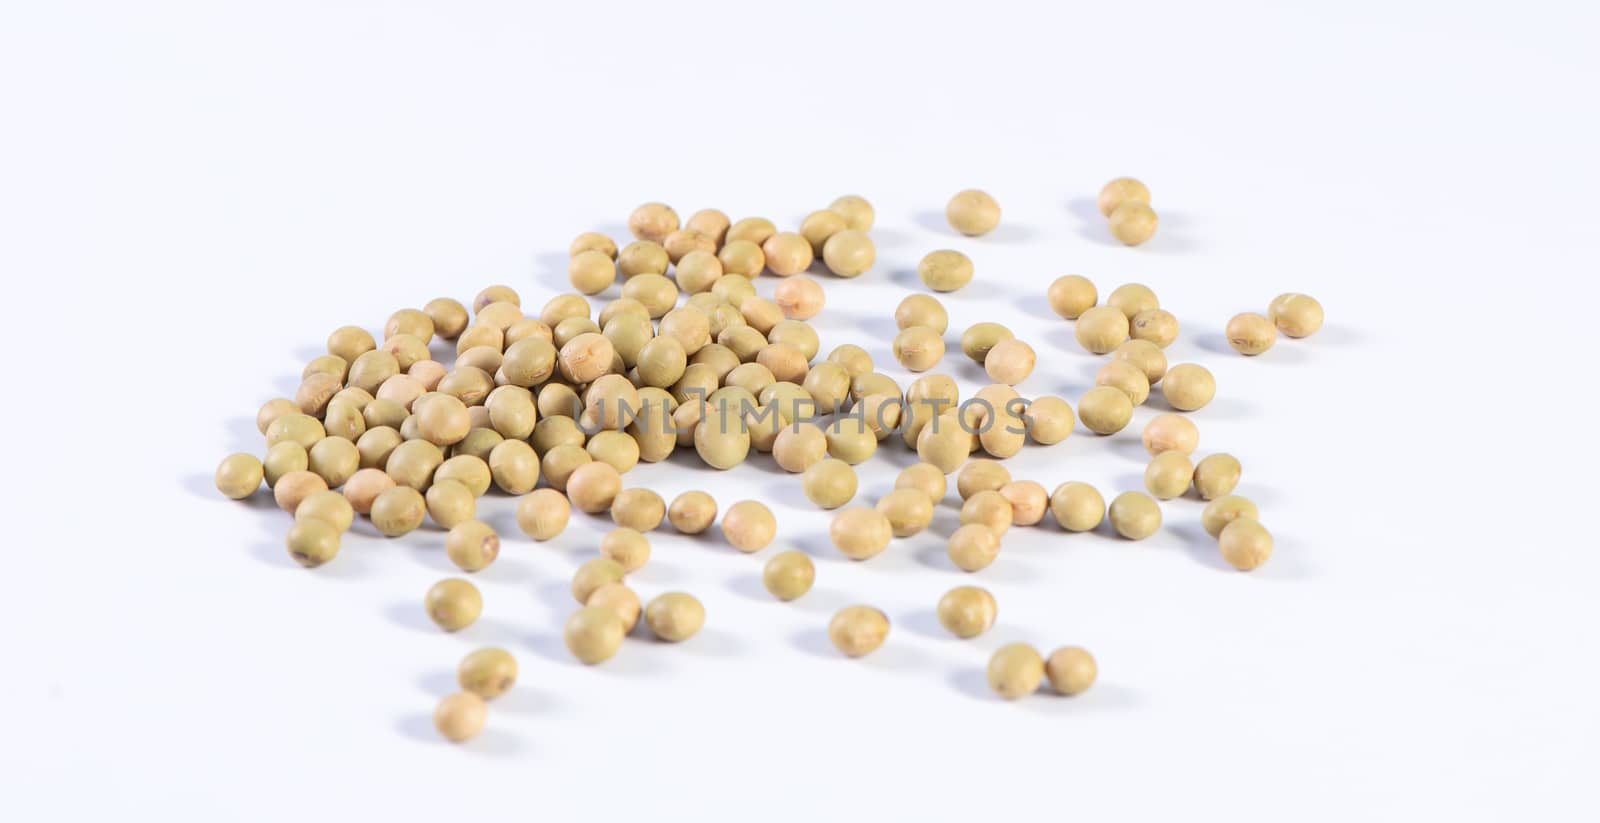 Yellow-green Taiwanese organic non-GMO soybeans, soy beans in a  by ROMIXIMAGE